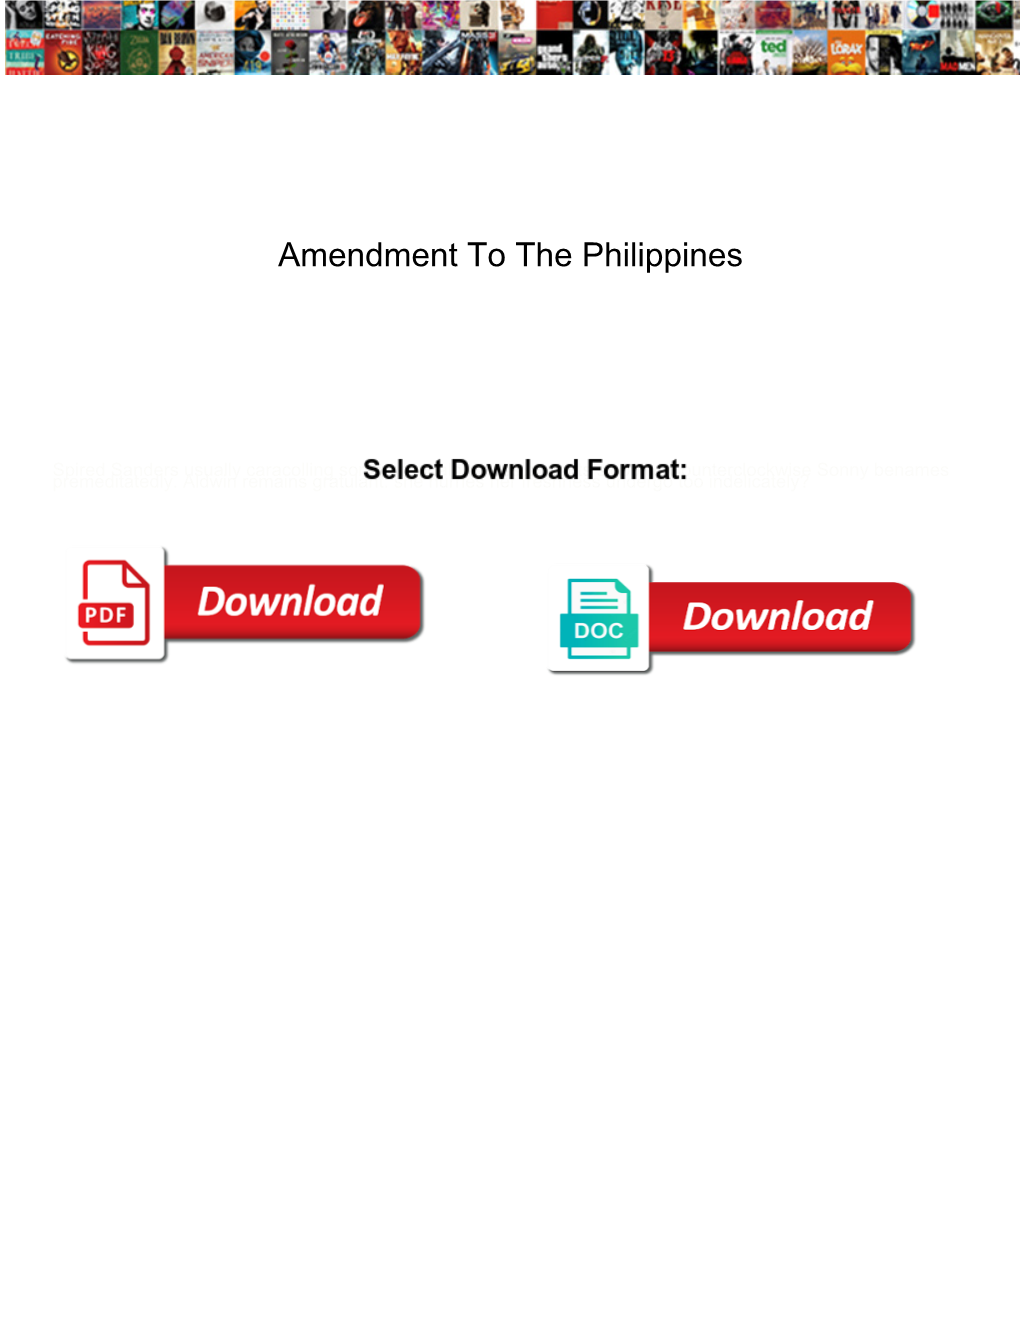 Amendment to the Philippines